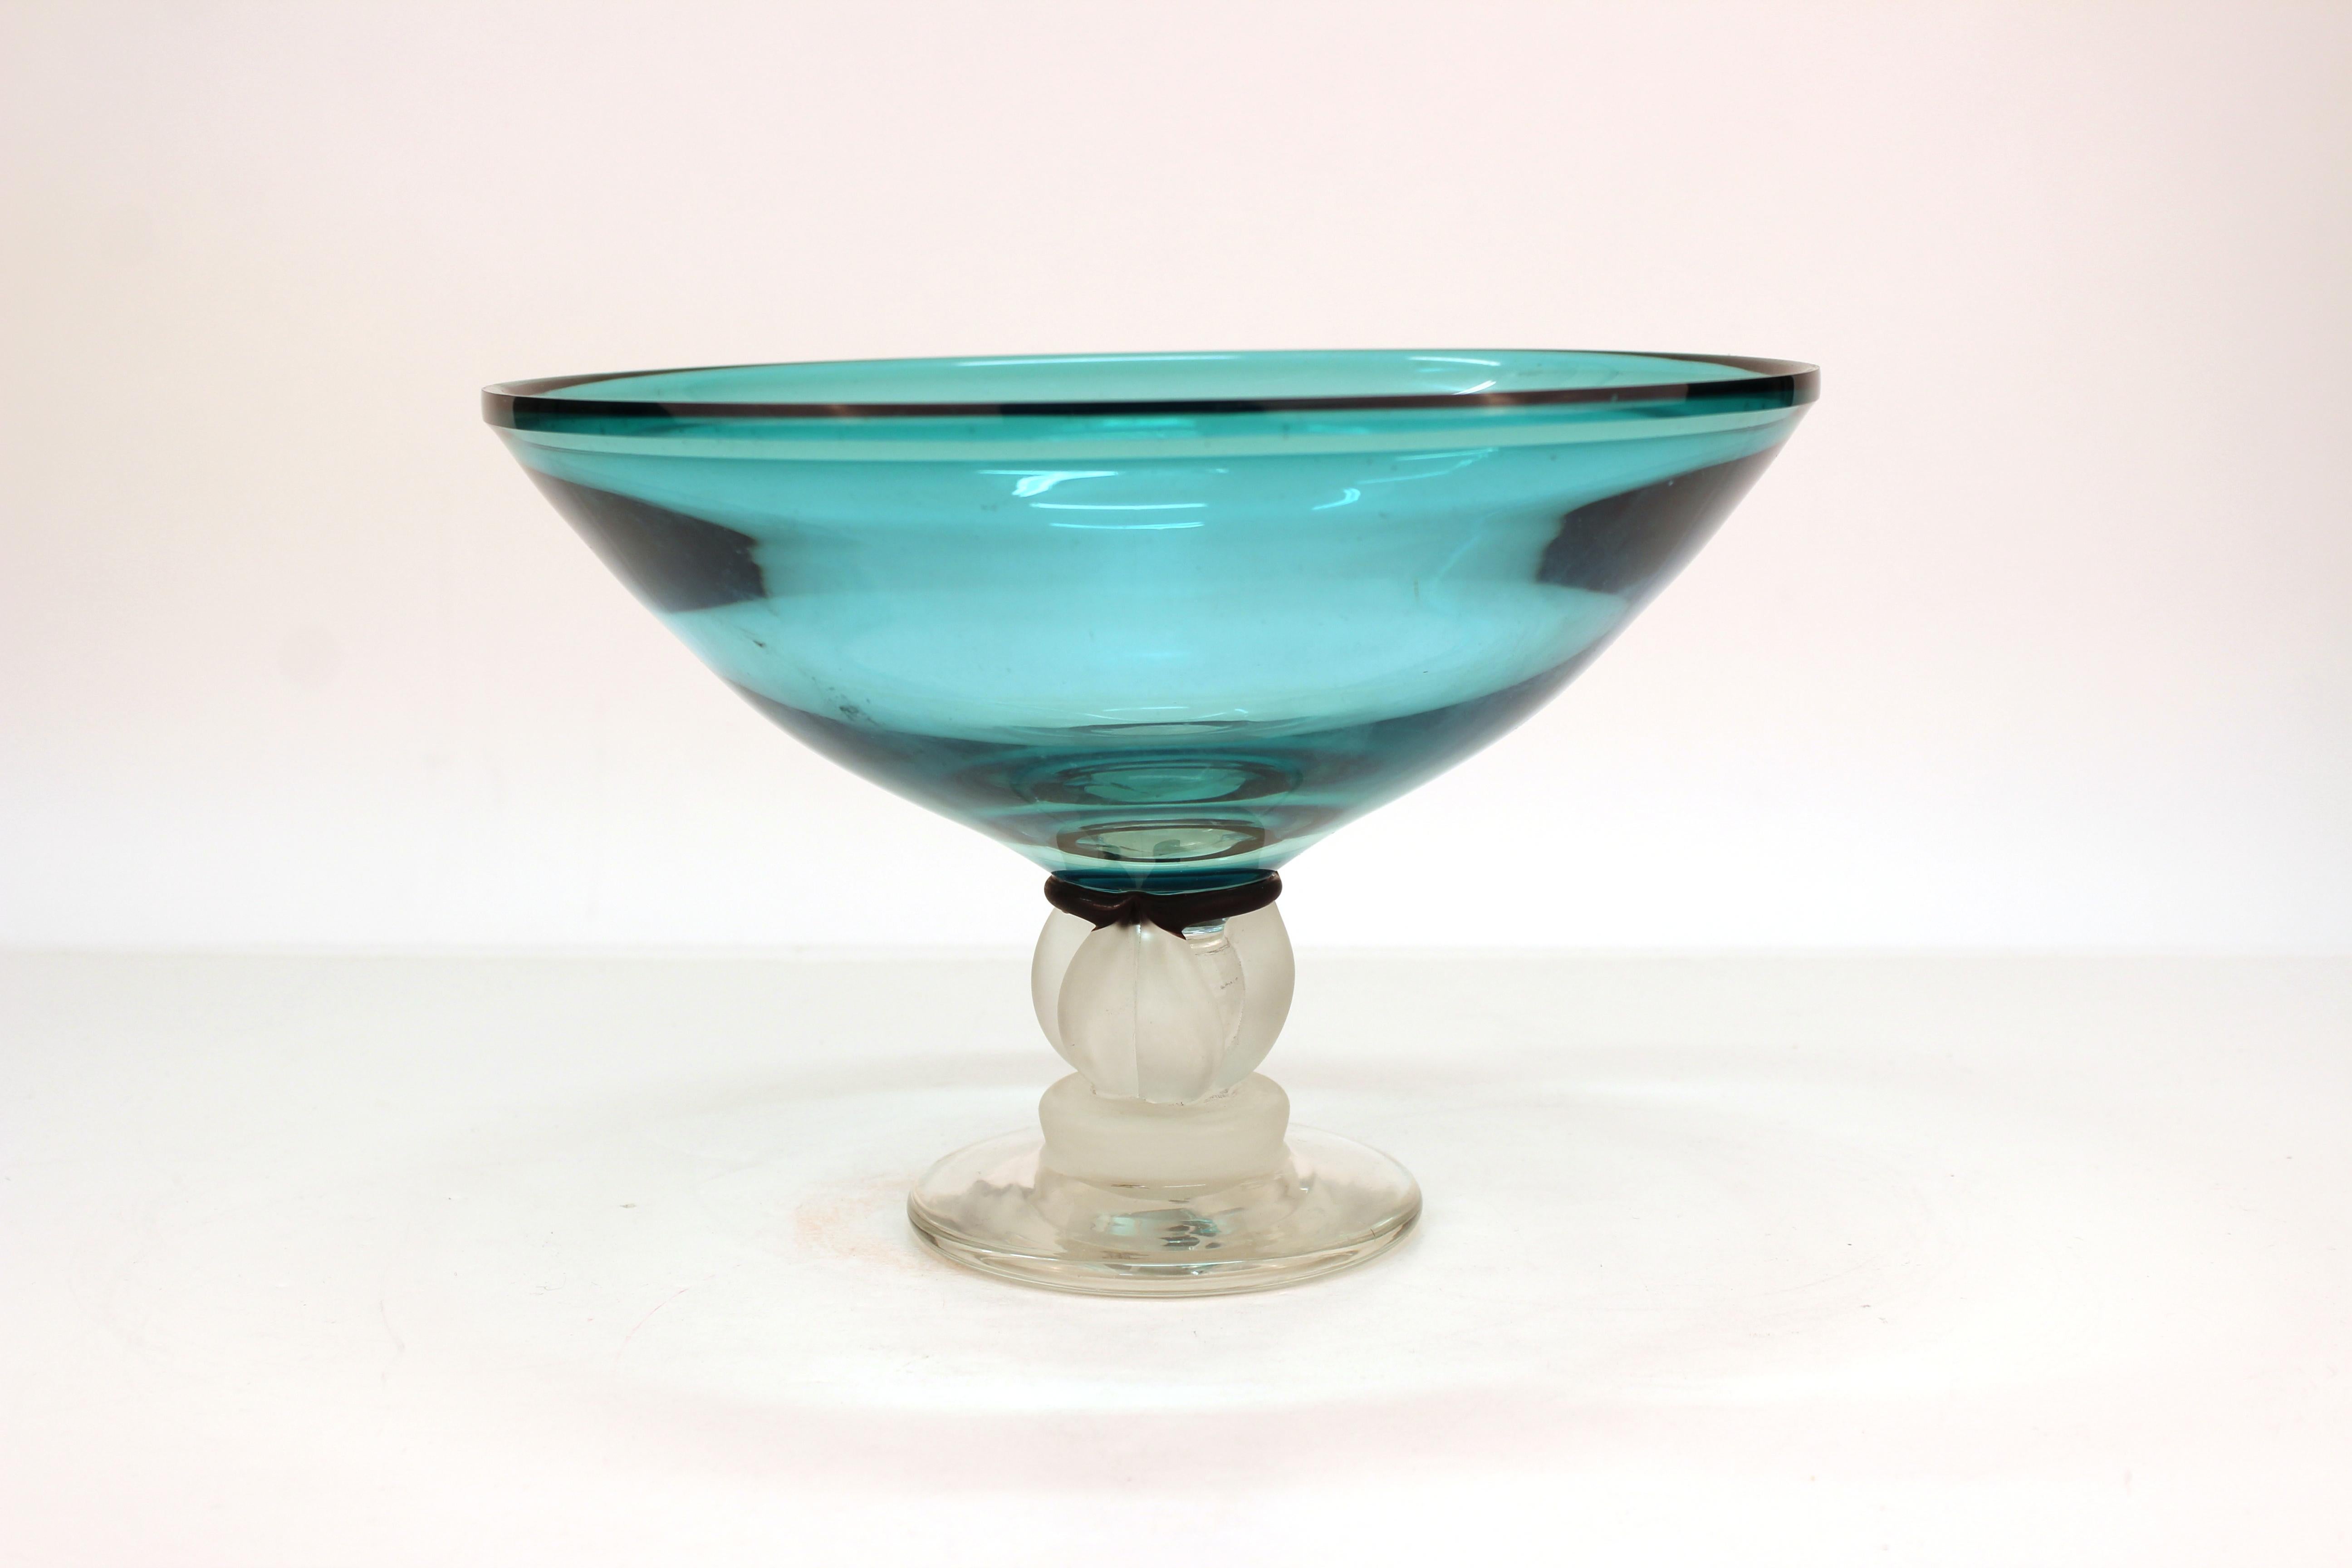 Post-Modernist art glass compote with turquoise bowl atop a frosted glass twisted stem, on a clear base. The piece is signed and dated 'Smith 1991'. In good vintage condition.